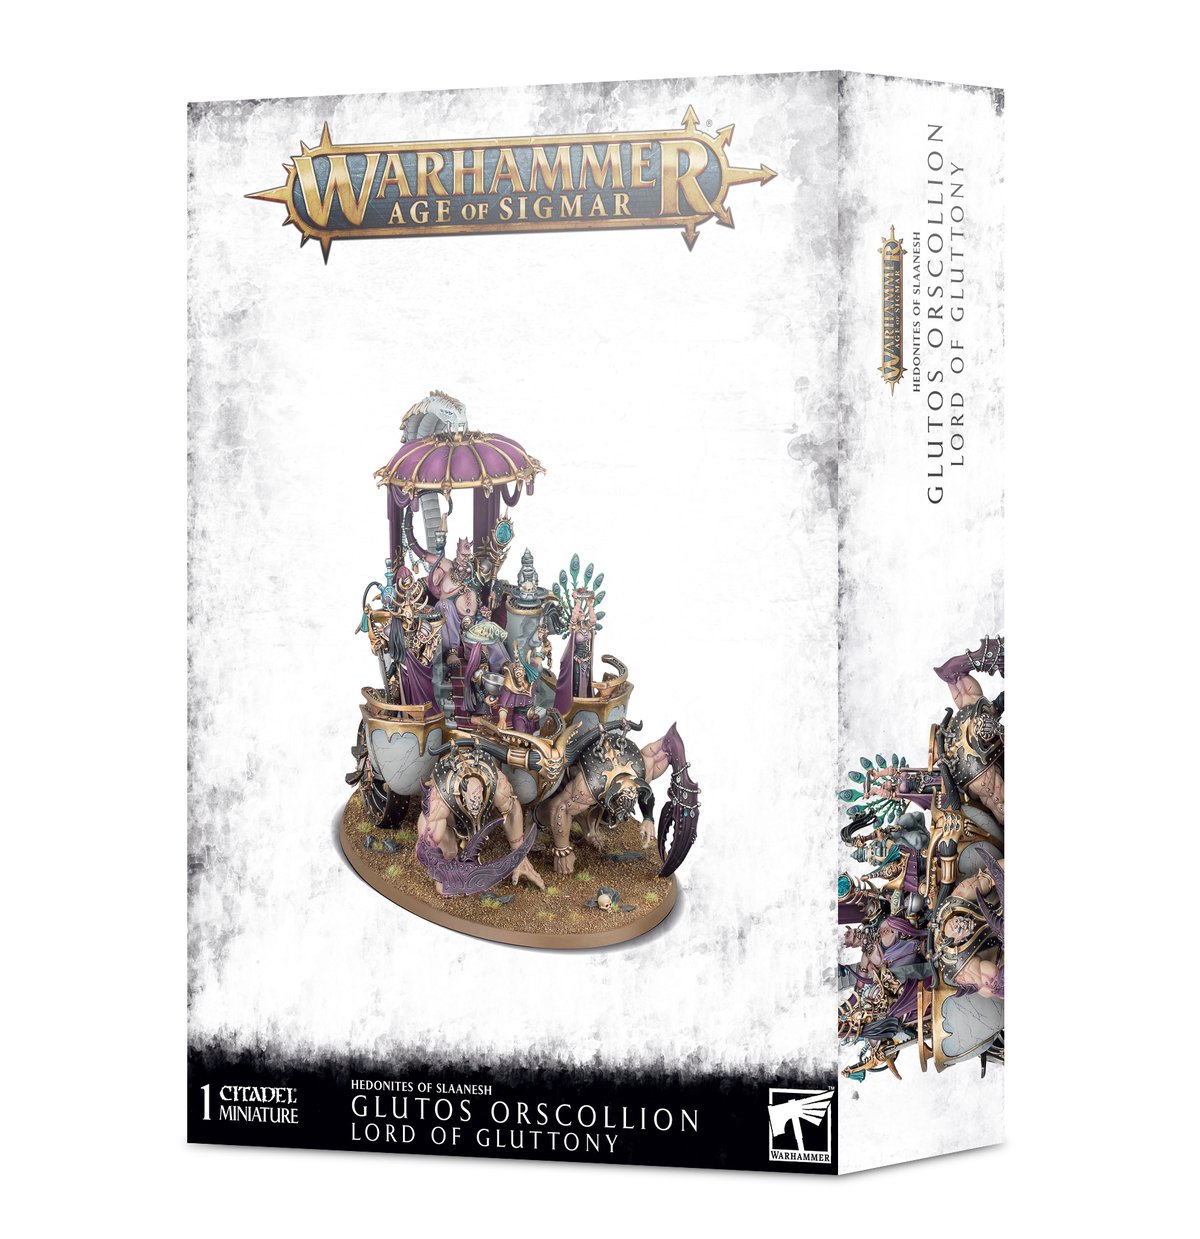 Warhammer Age of Sigmar: Hedonites of Slaanesh: Glutos Orscollion Lord of Gluttony 